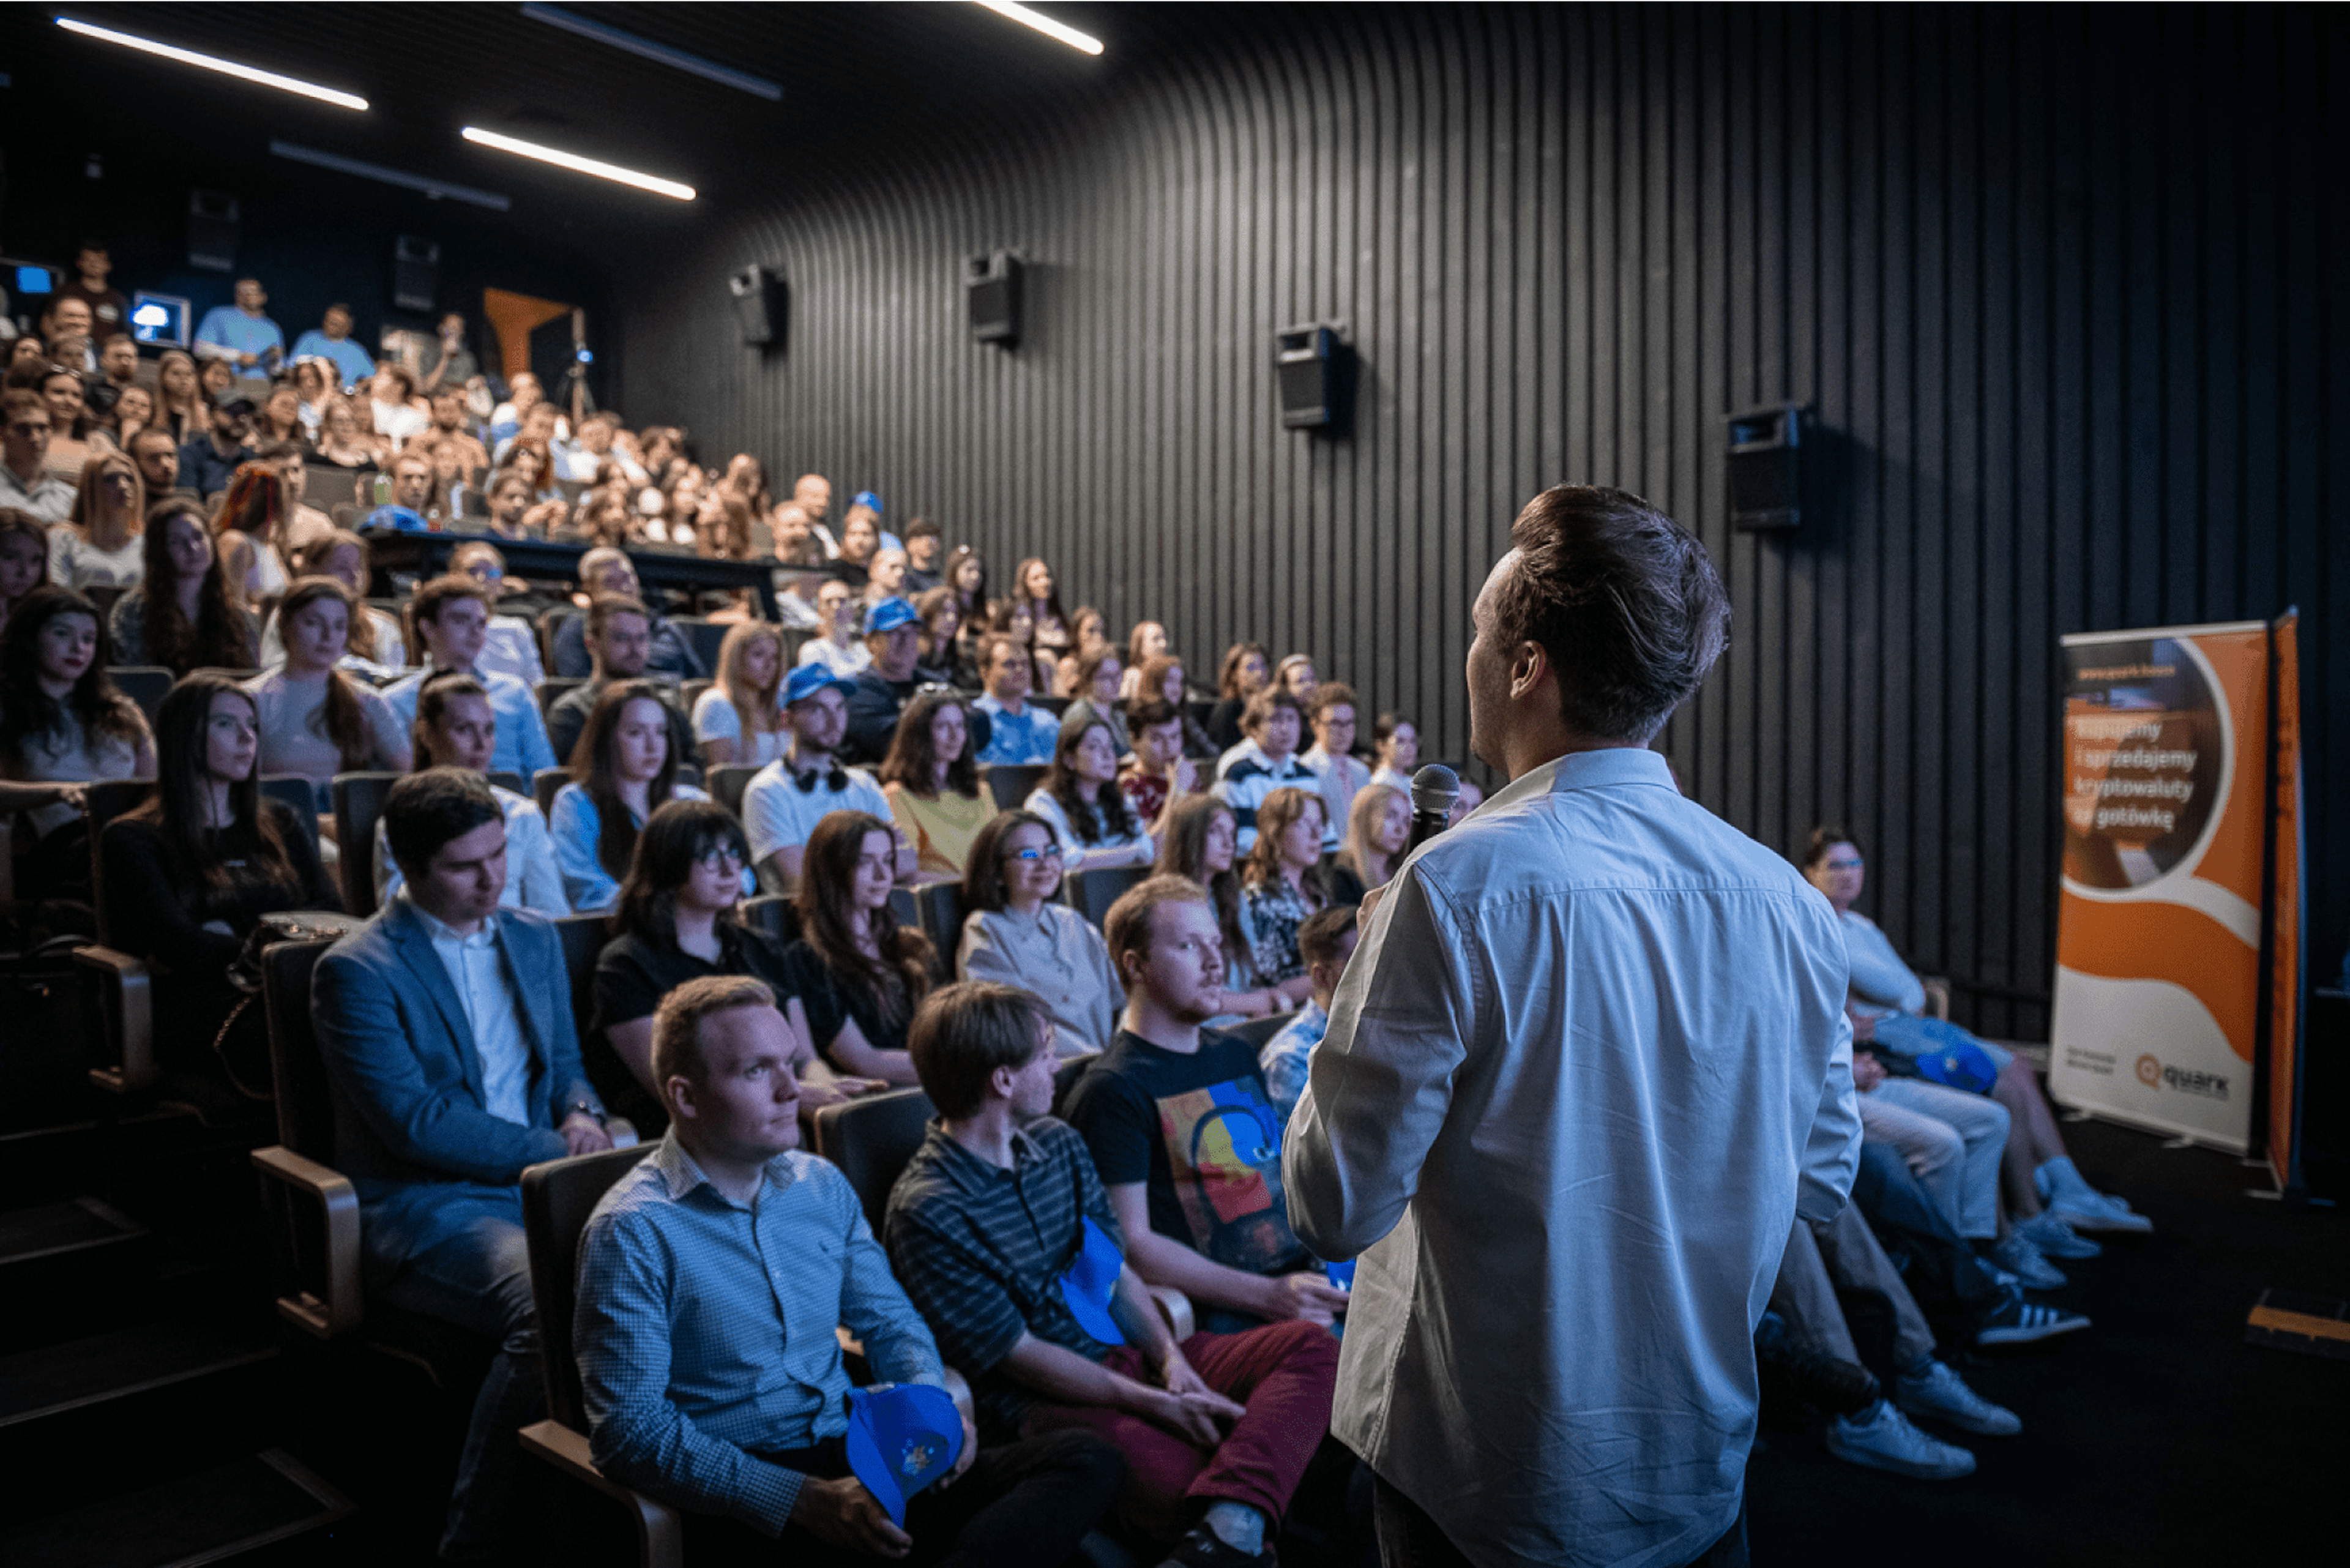 Speaker presenting to a full audience in a dark auditorium, with attendees attentively listening and engaged in the presentation.